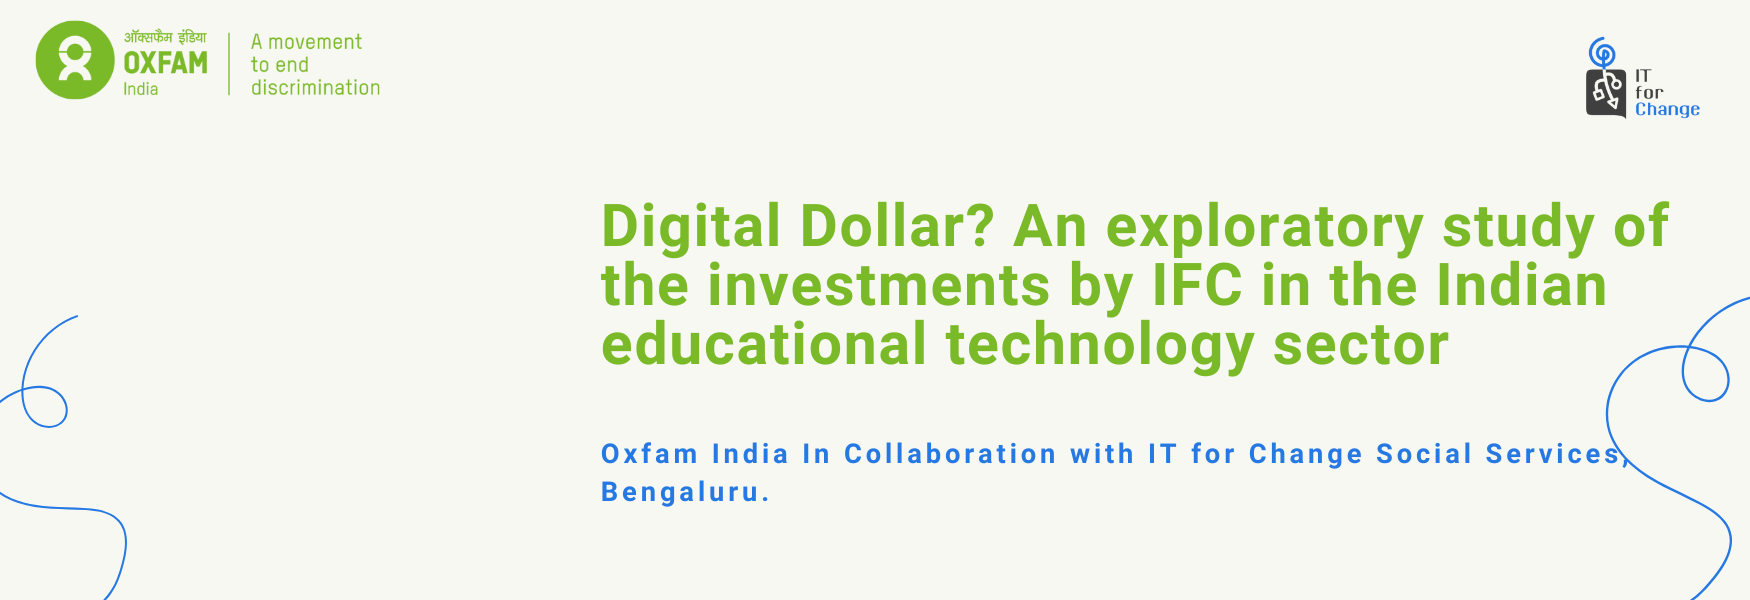 Digital Dollar? An exploratory study of the investments by IFC in the Indian educational technology sector